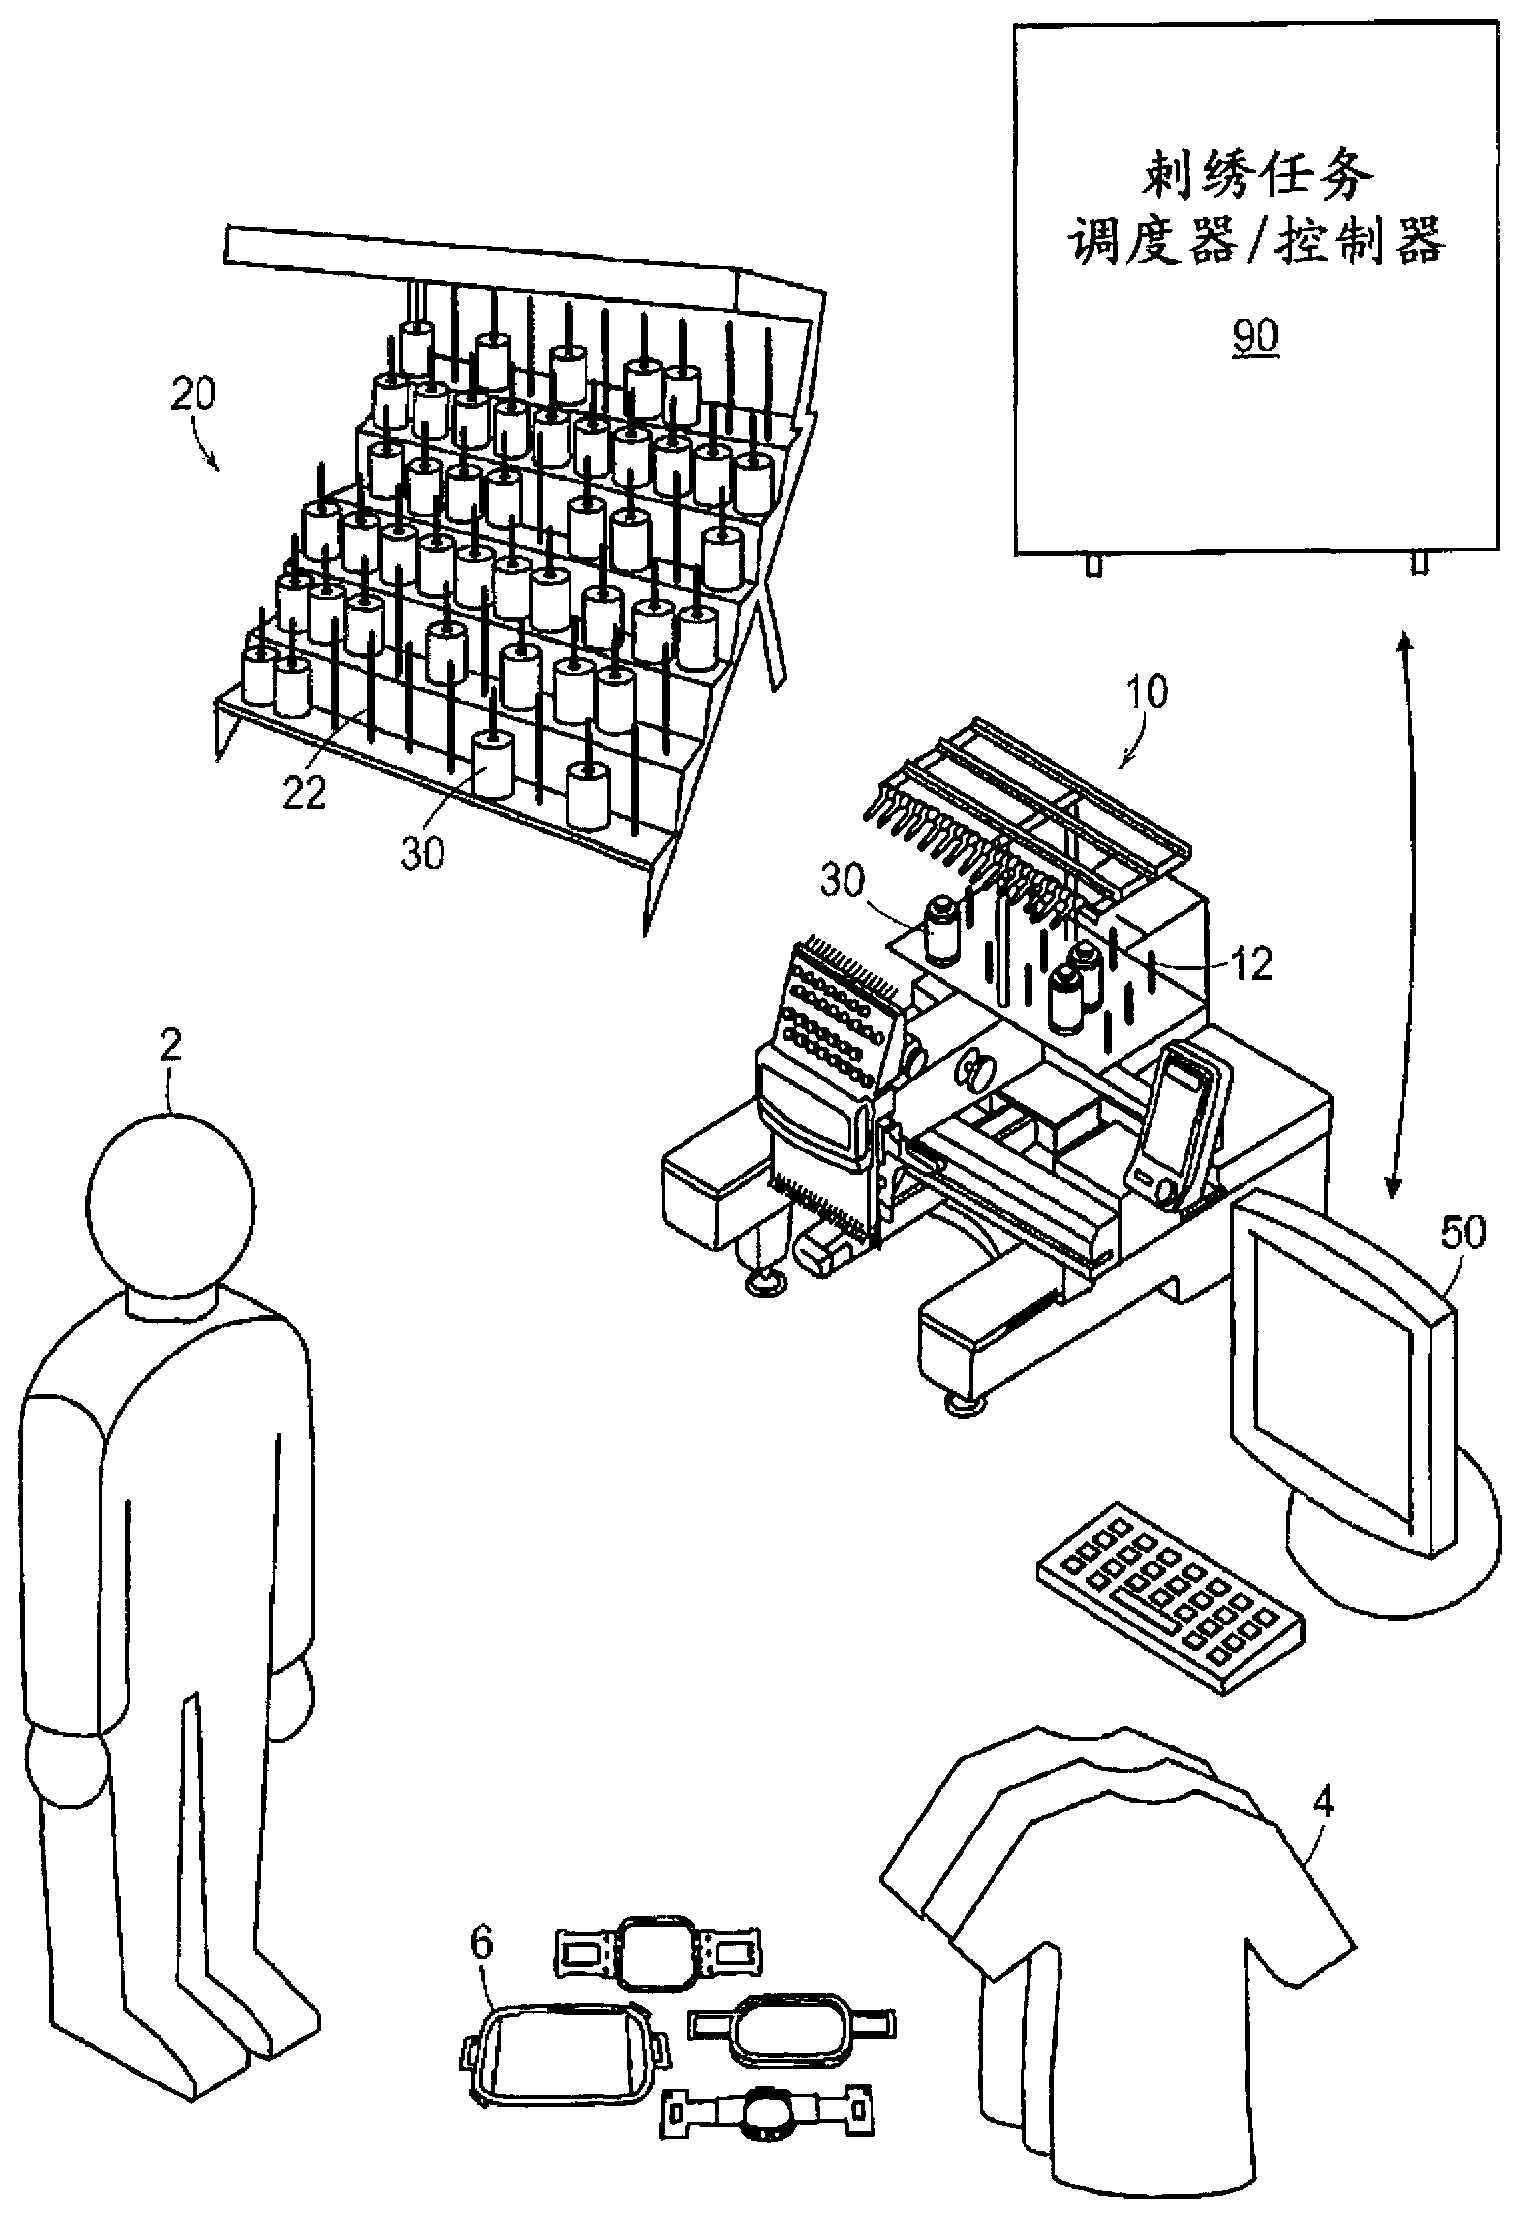 Embroidery workstation utility cart